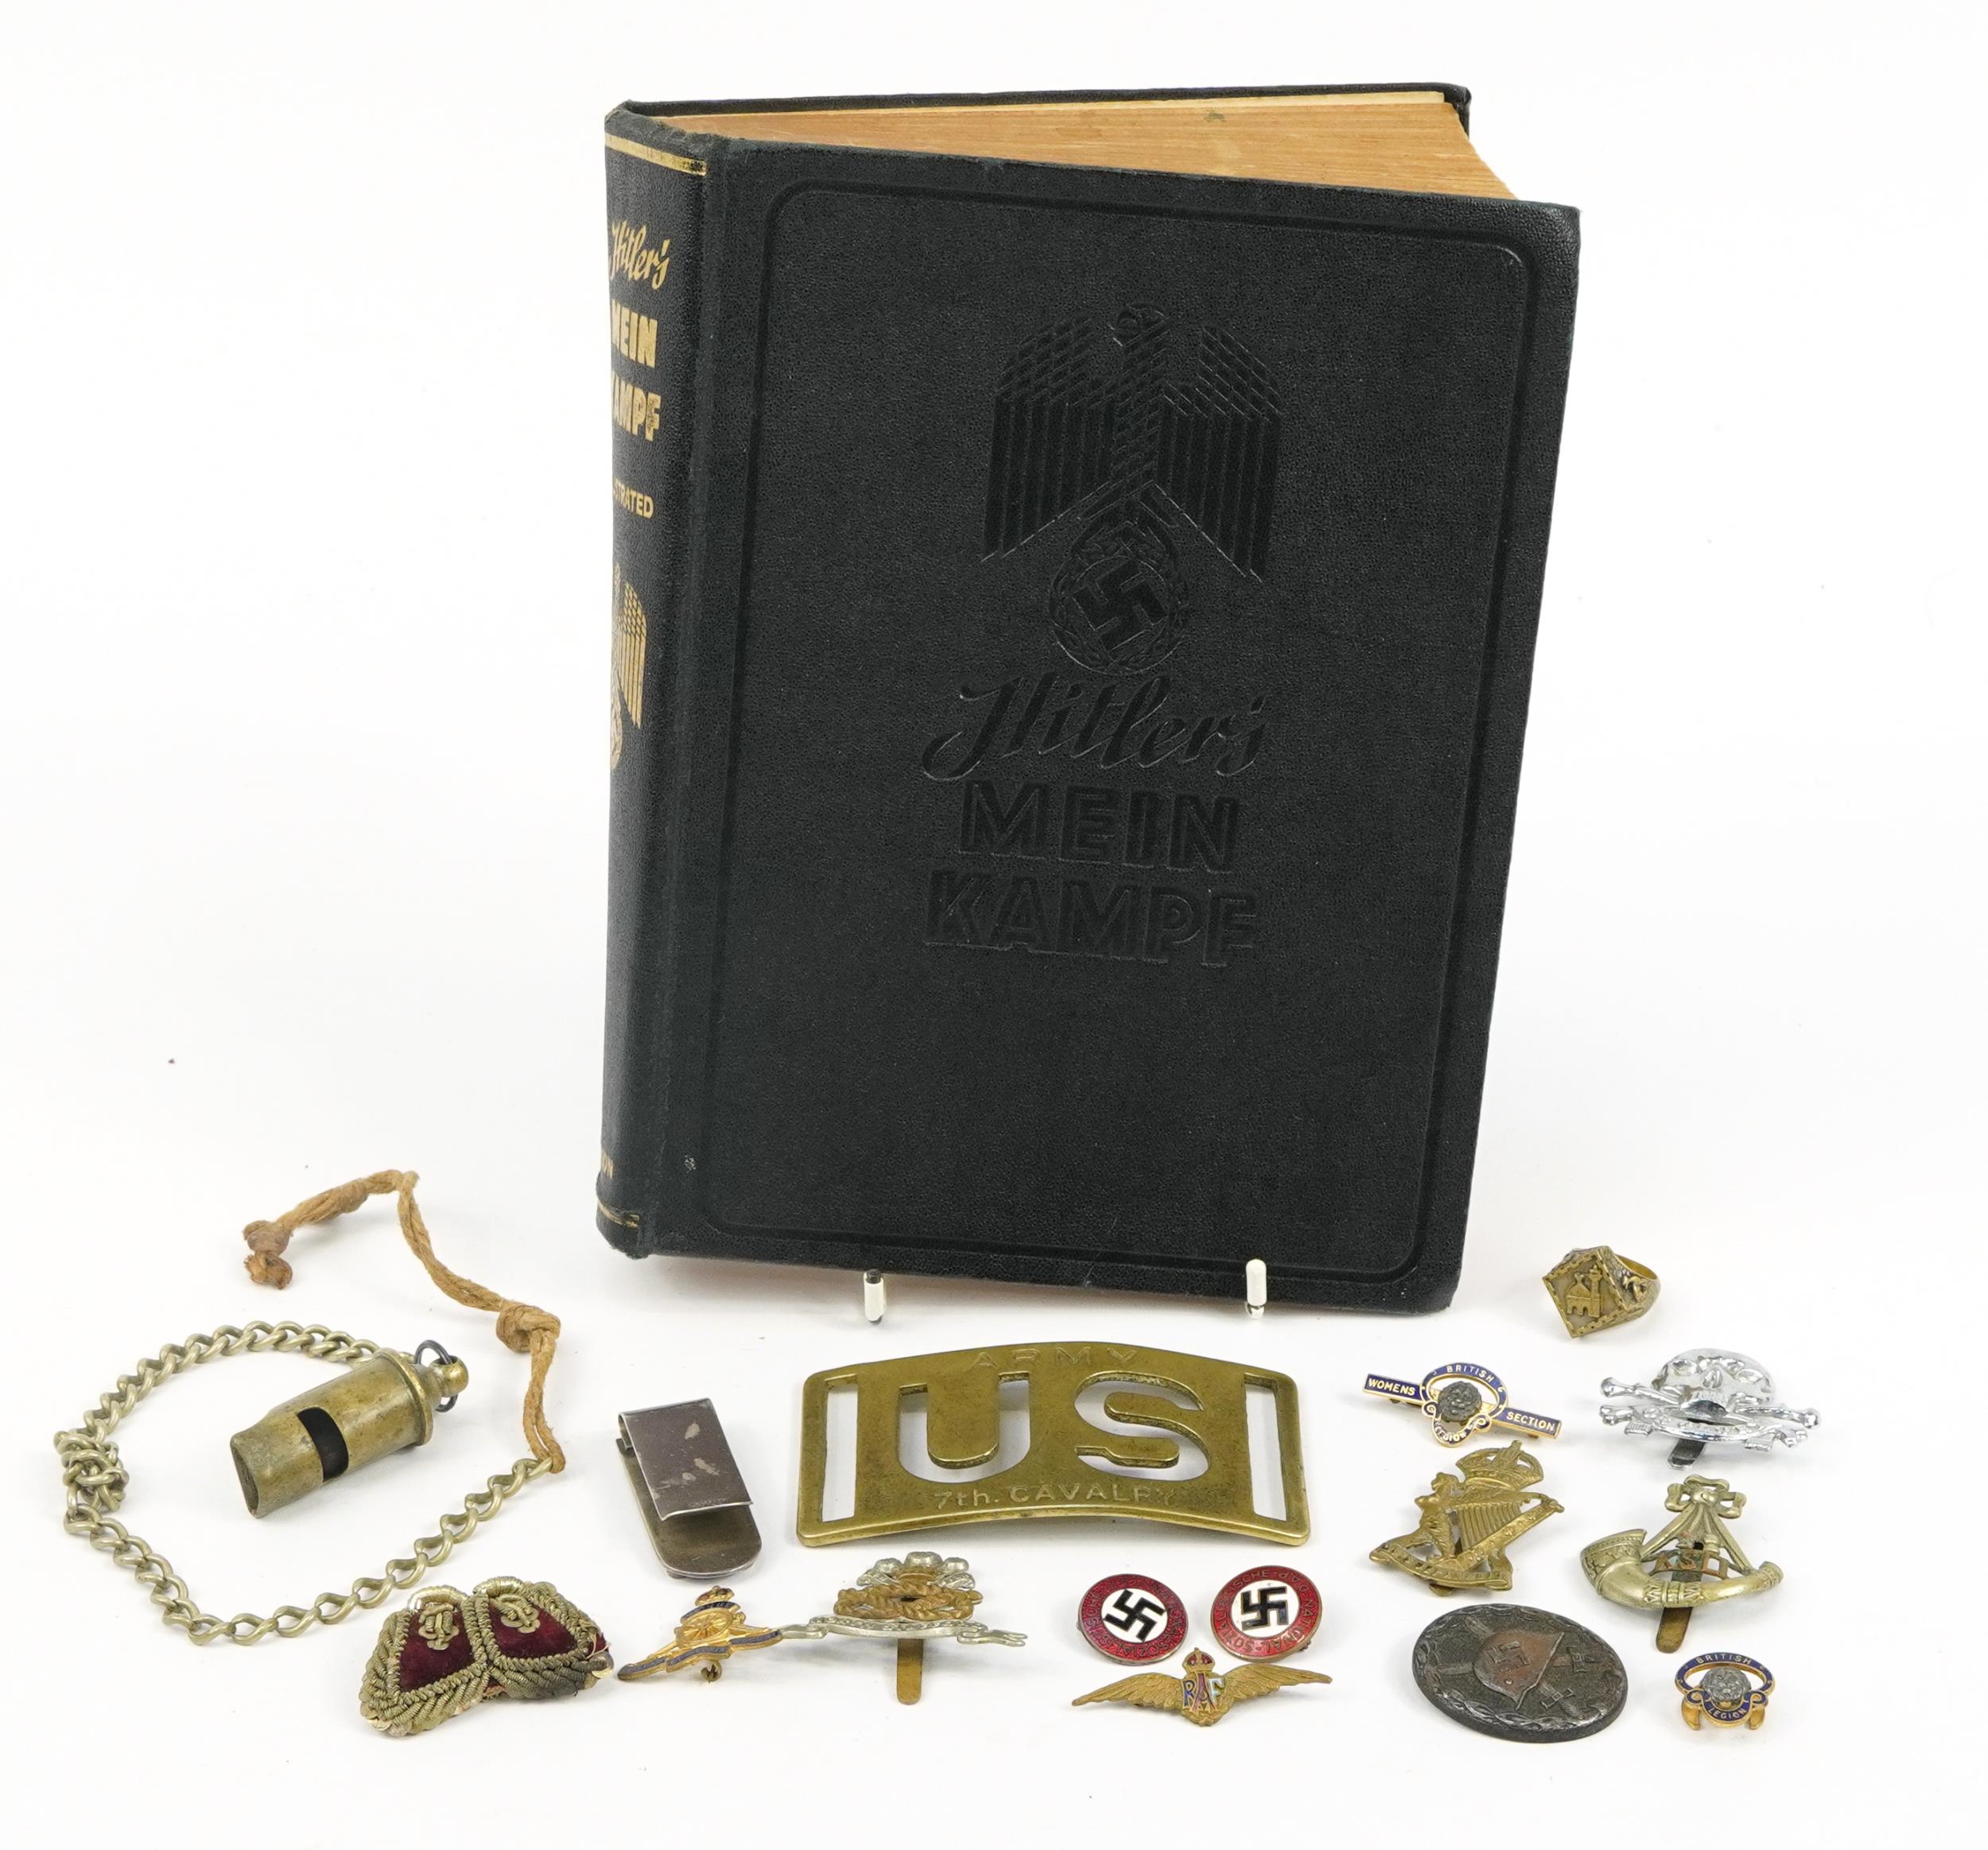 American US and German military interest militaria including German wounds badge, cap badges, ring